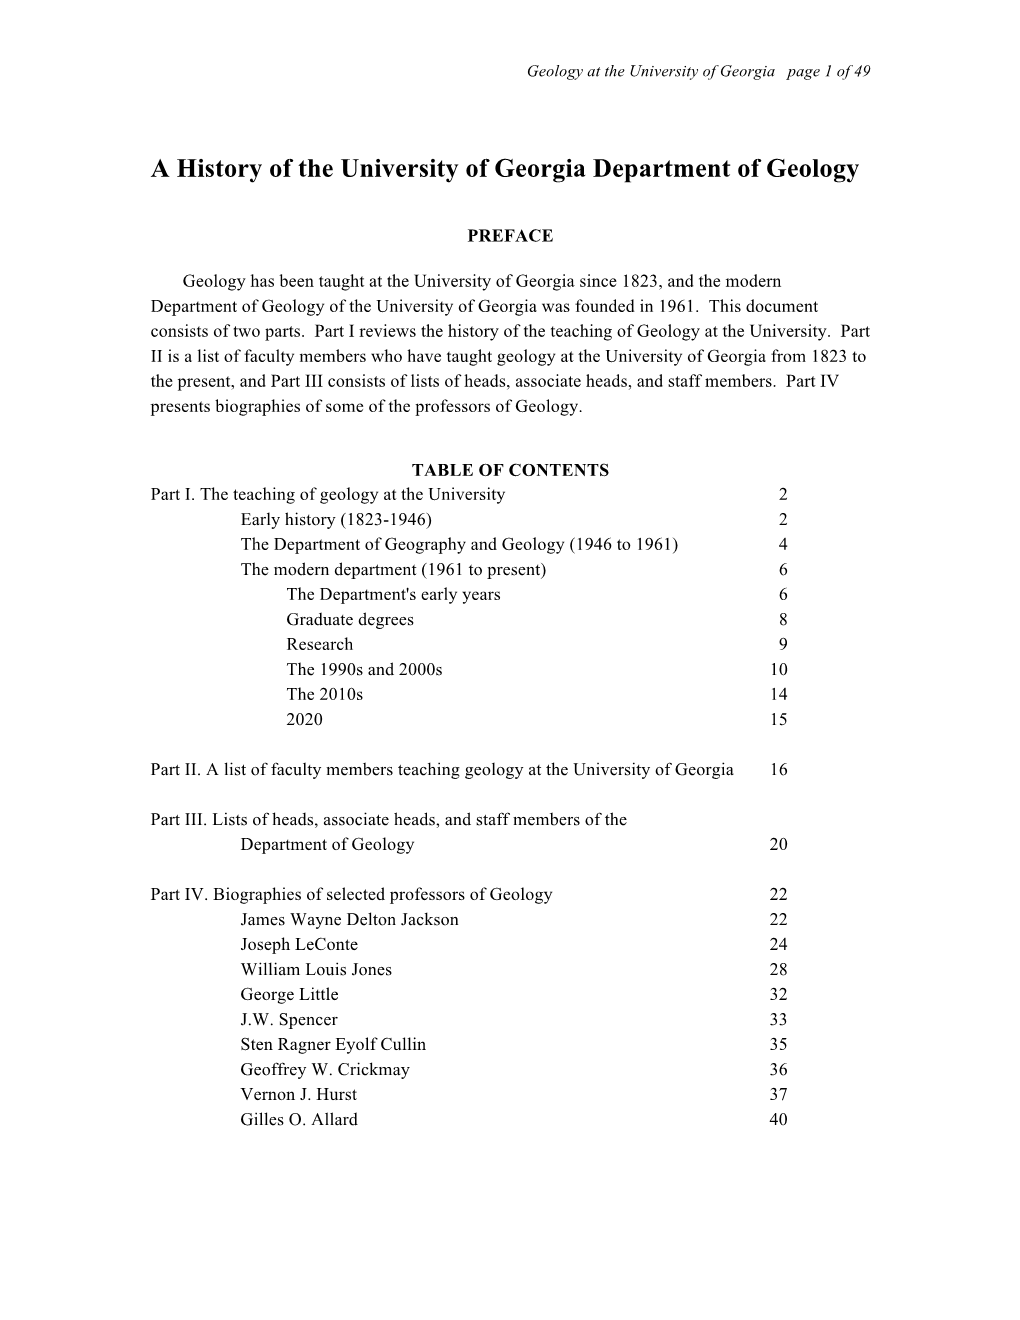 A History of the University of Georgia Department of Geology